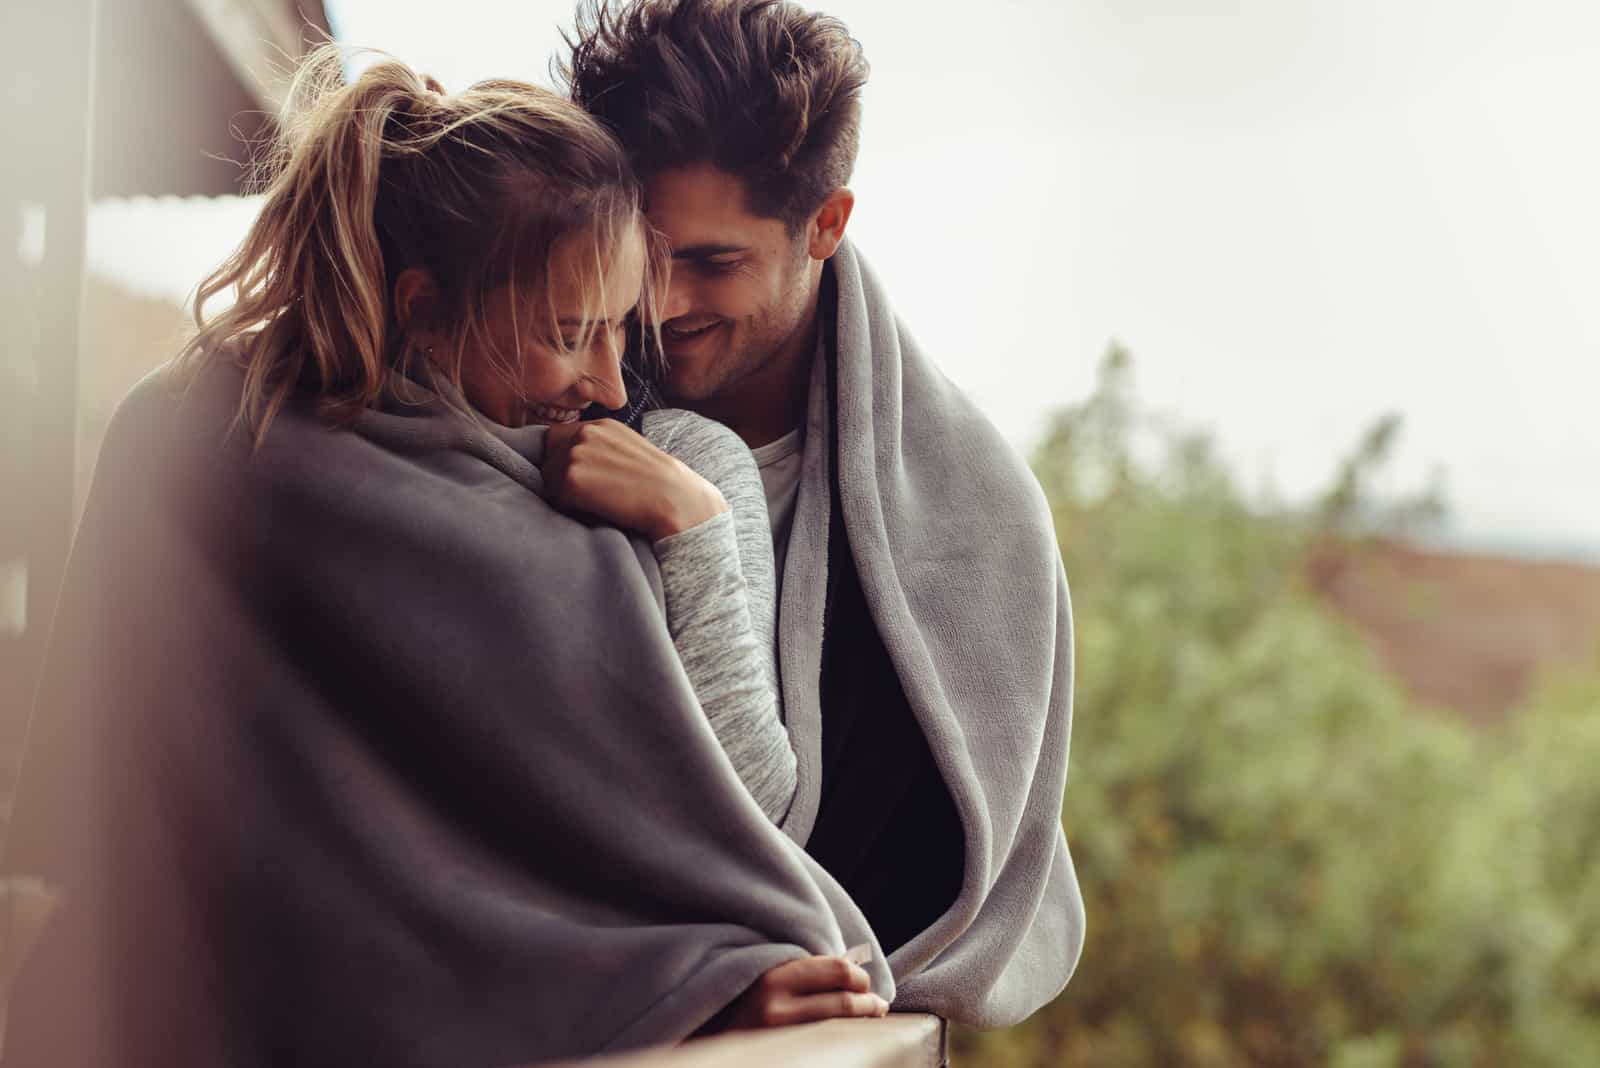 Man and woman standing together in a hotel room balcony wrapped in blanket